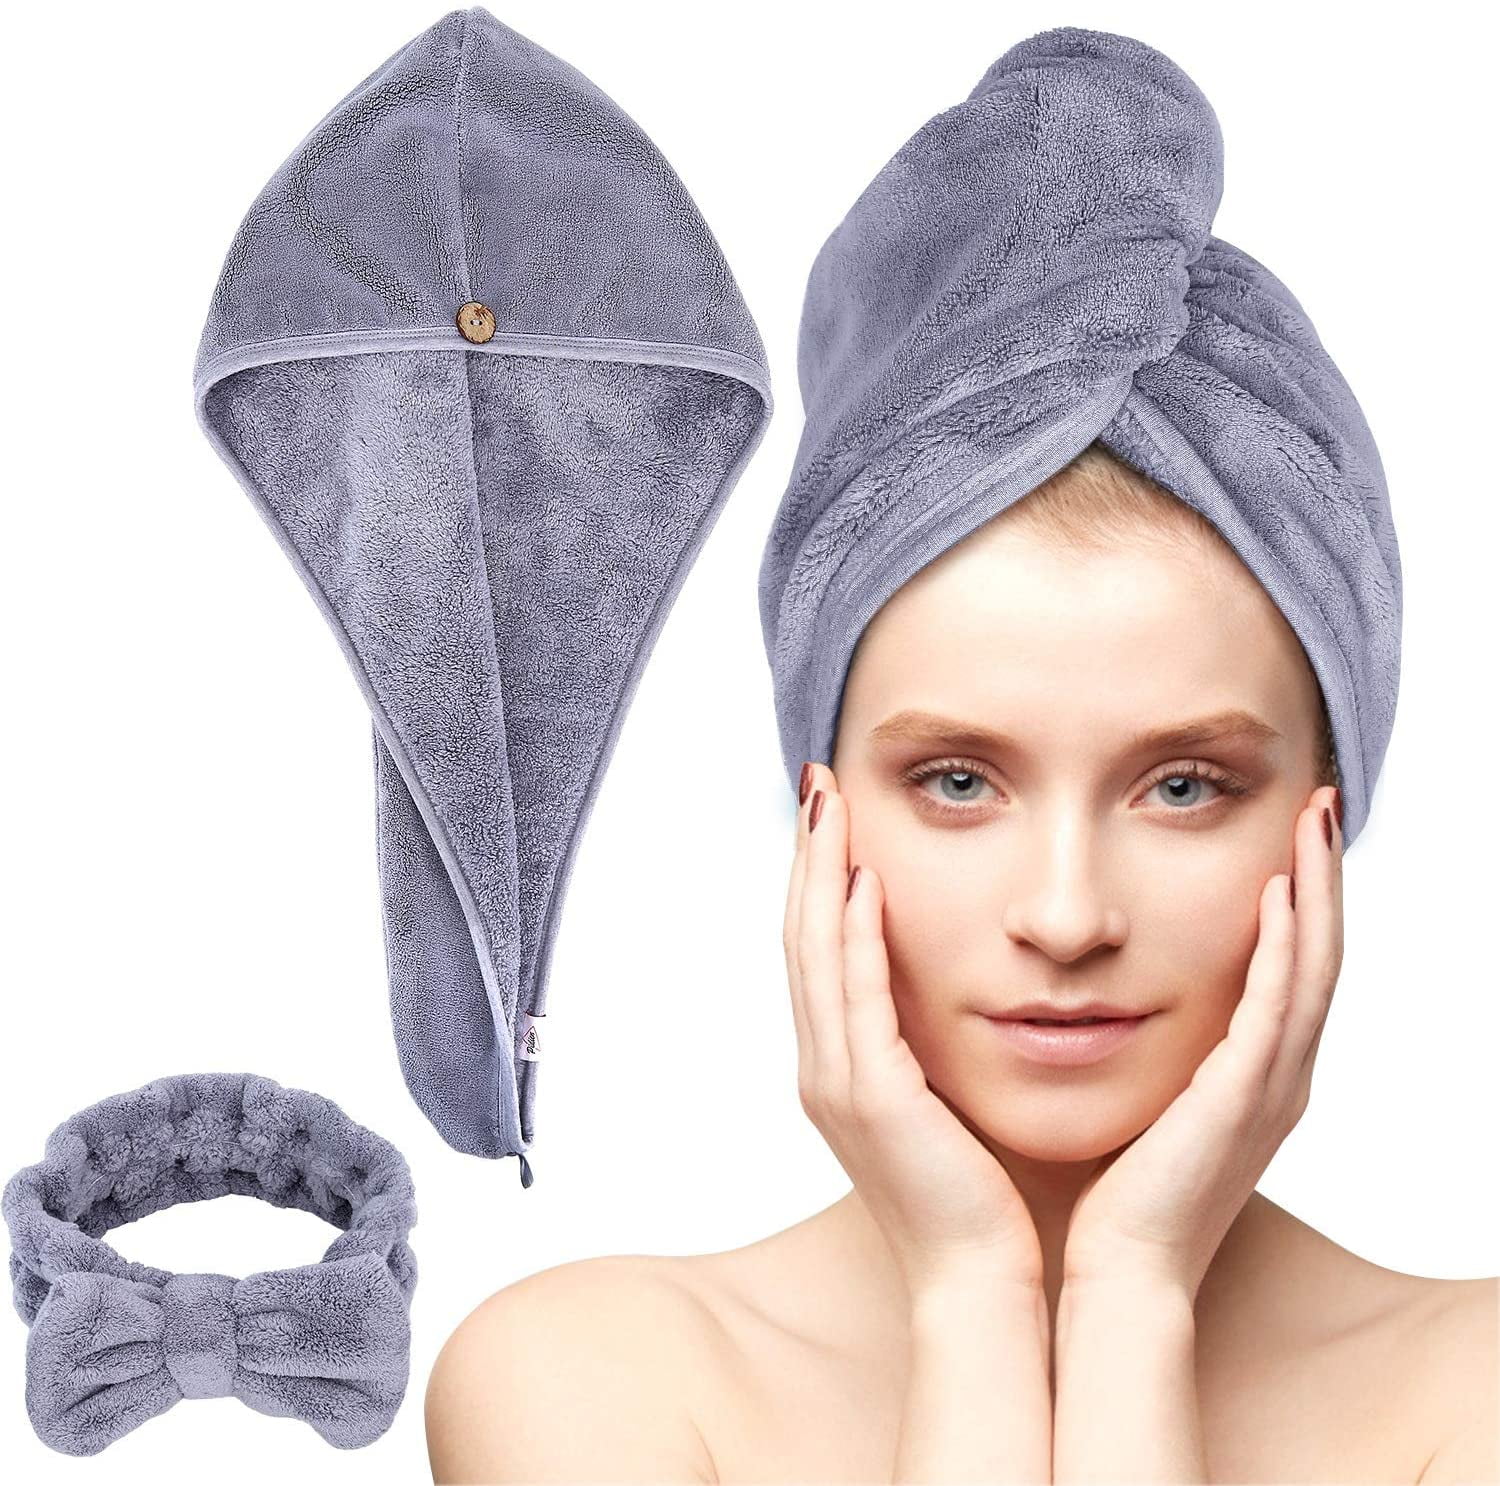 For Fast Safe & Frizz-free Drying Absorbent Premium Microfiber Hair Towel 